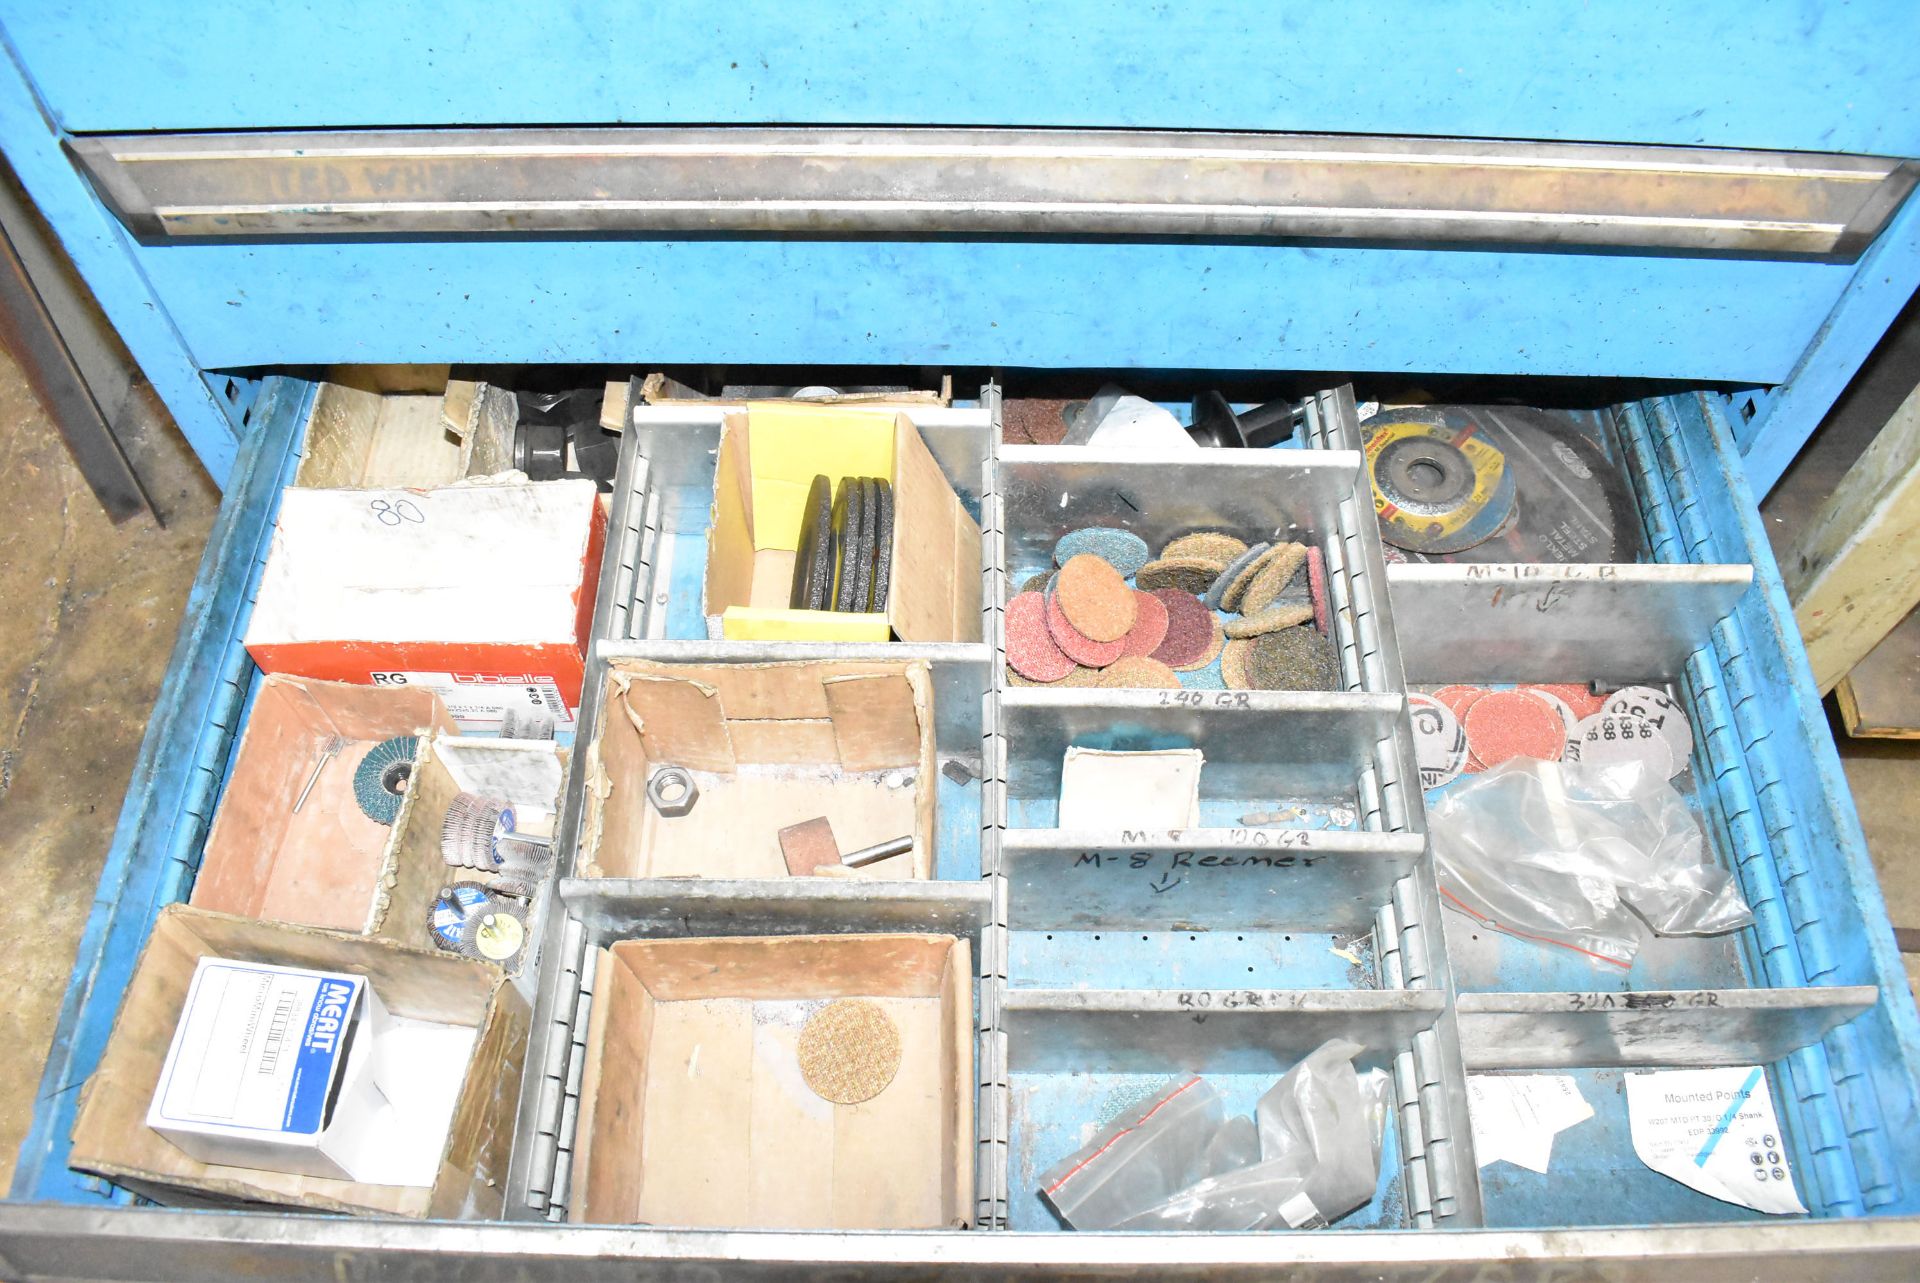 LOT/ ROUSSEAU 8-DRAWER CABINET WITH CONTENTS CONSISTING OF CUTTERS, REAMERS, ABRASIVES & HARDWARE - Image 6 of 7